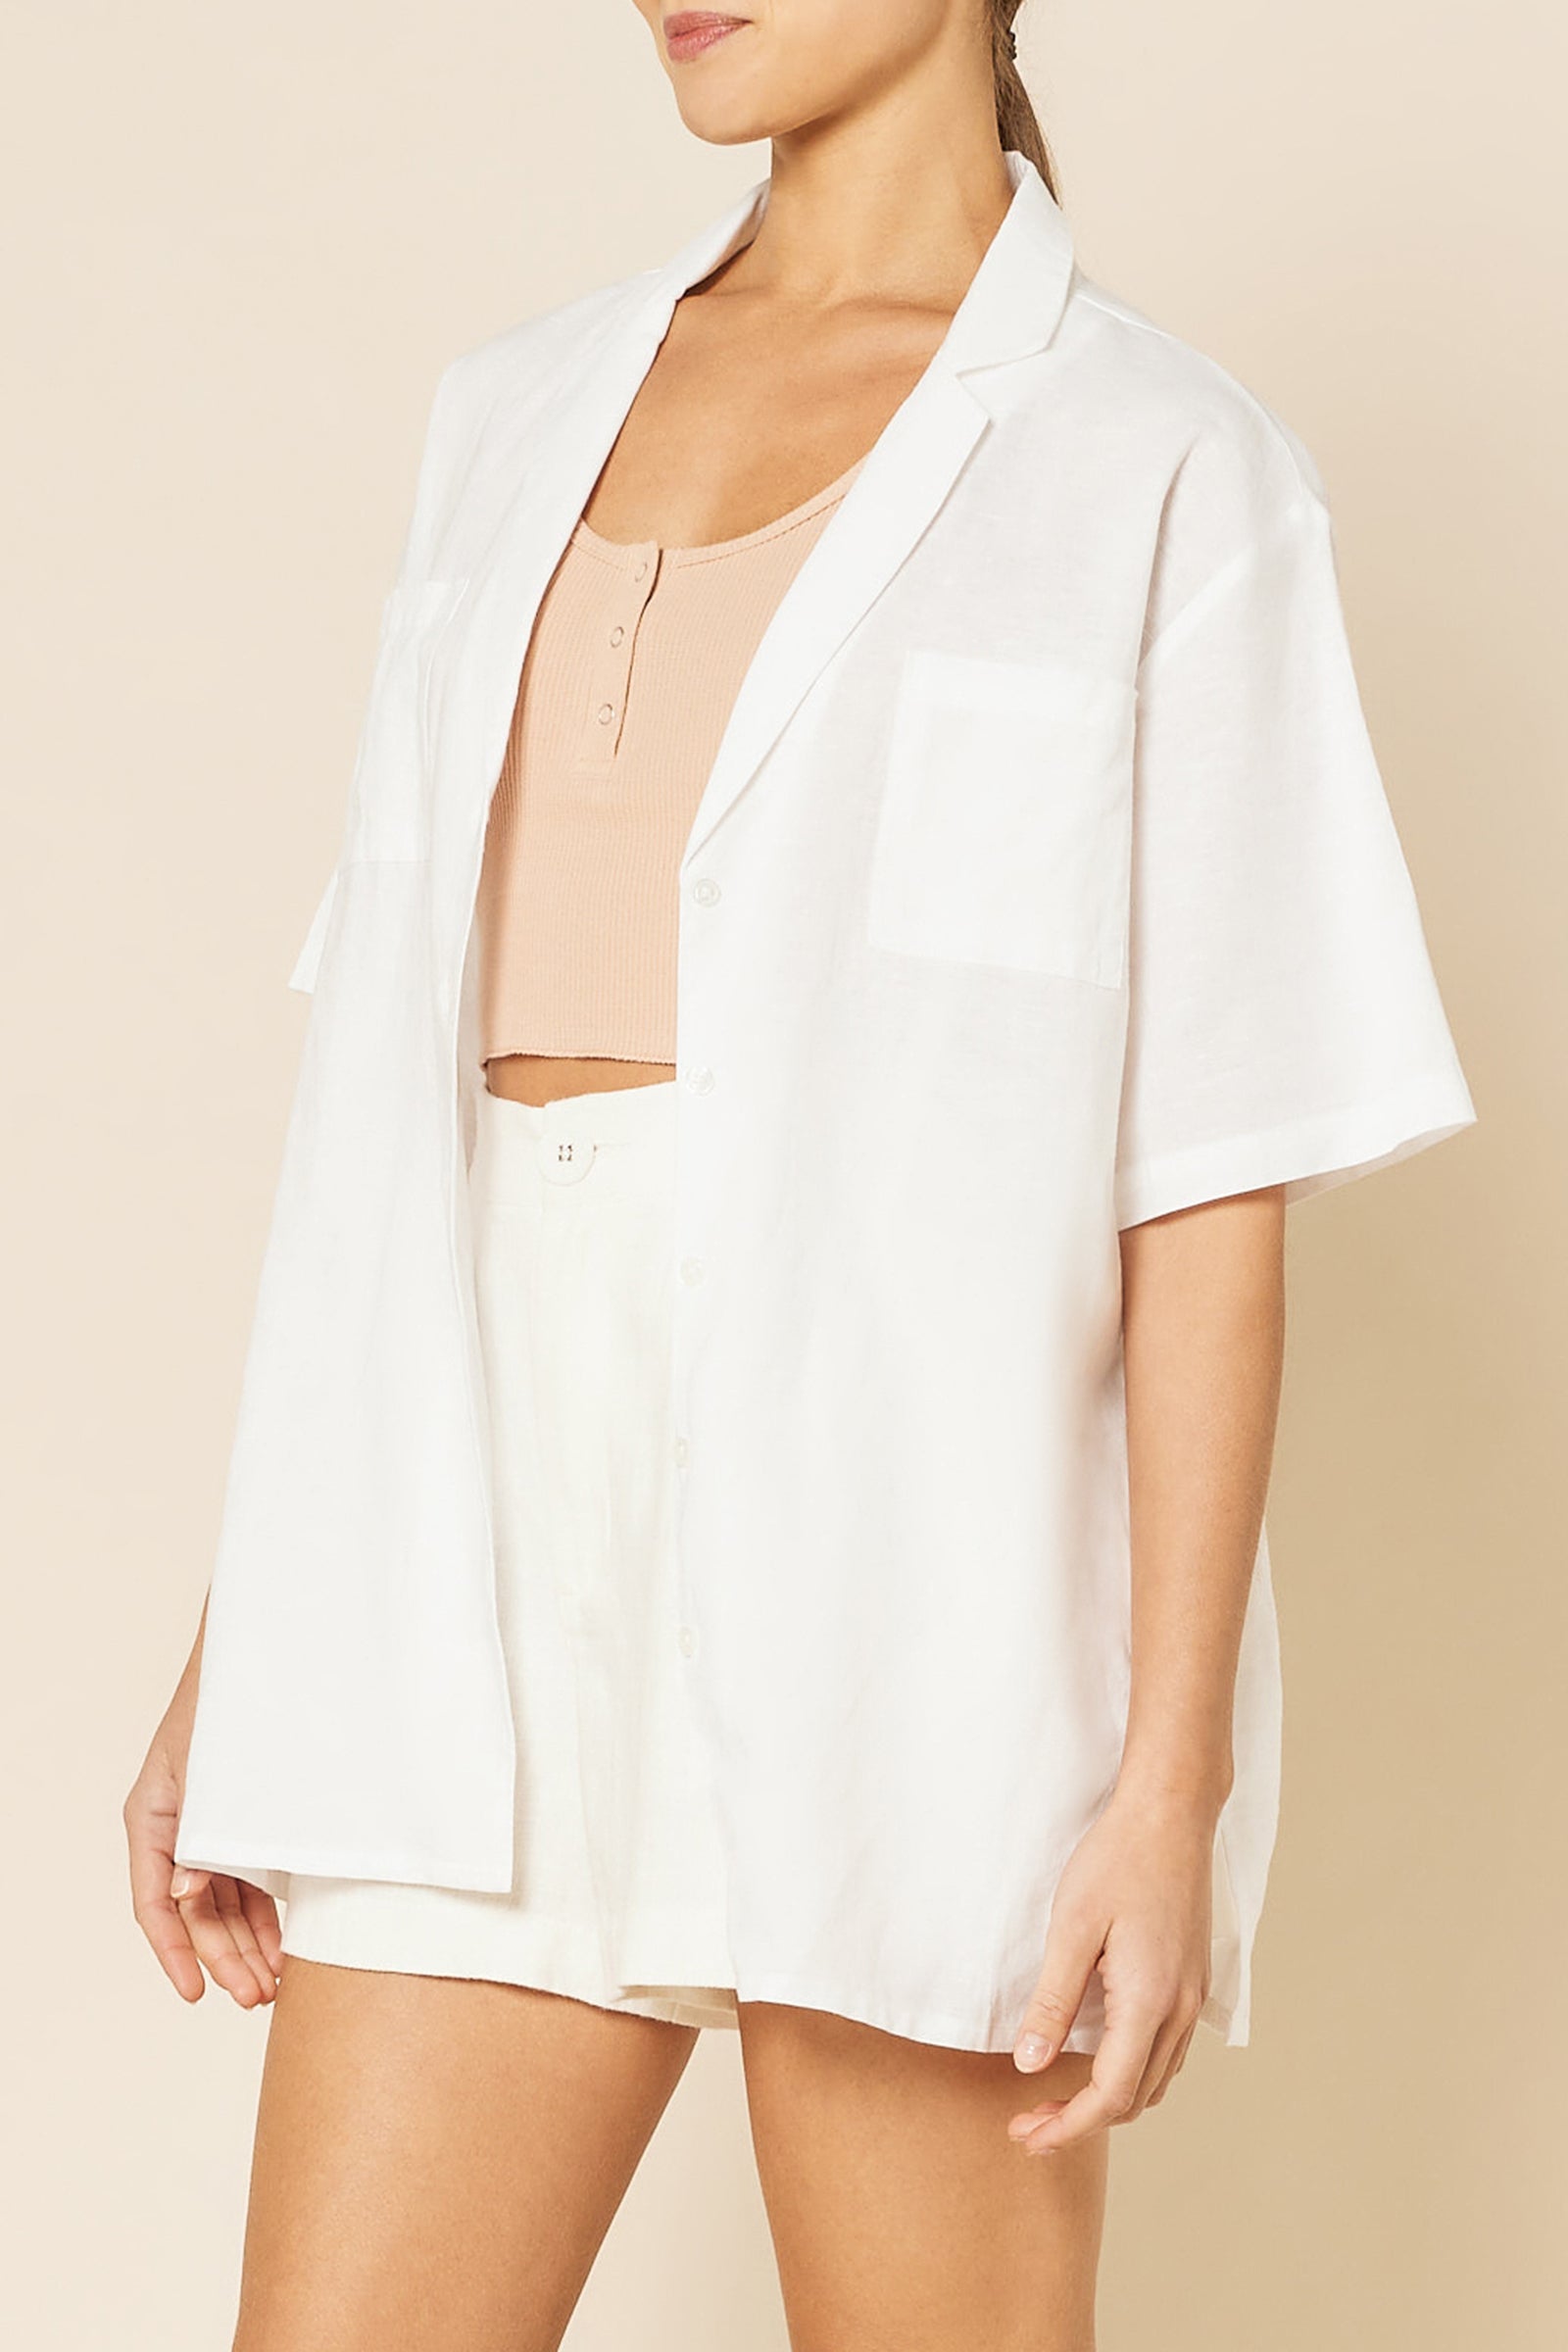 Nude Lucy Nude Resort Shirt in White